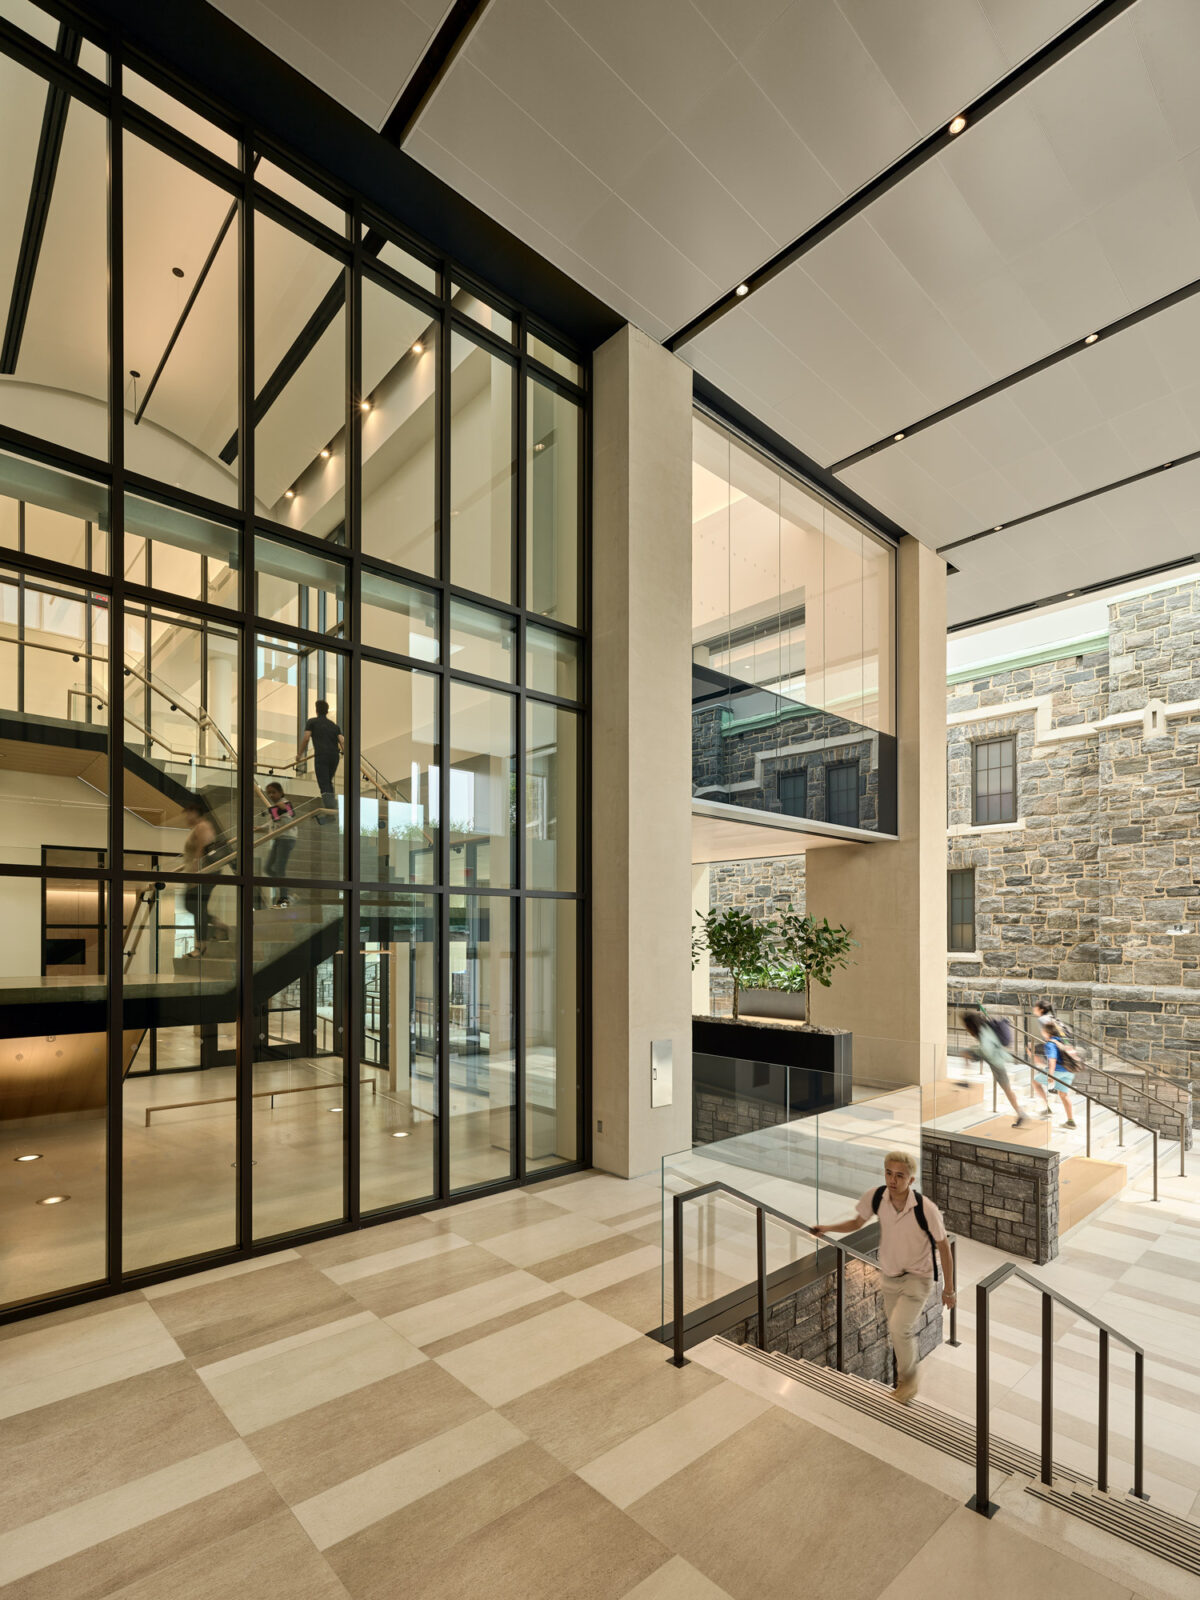 Modern interior featuring a double-height atrium with a checkered floor pattern. Glass partitions provide transparency, complementing the clean lines of the steel staircases. Stone walls add texture, enhancing the space's blend of industrial and natural design elements.